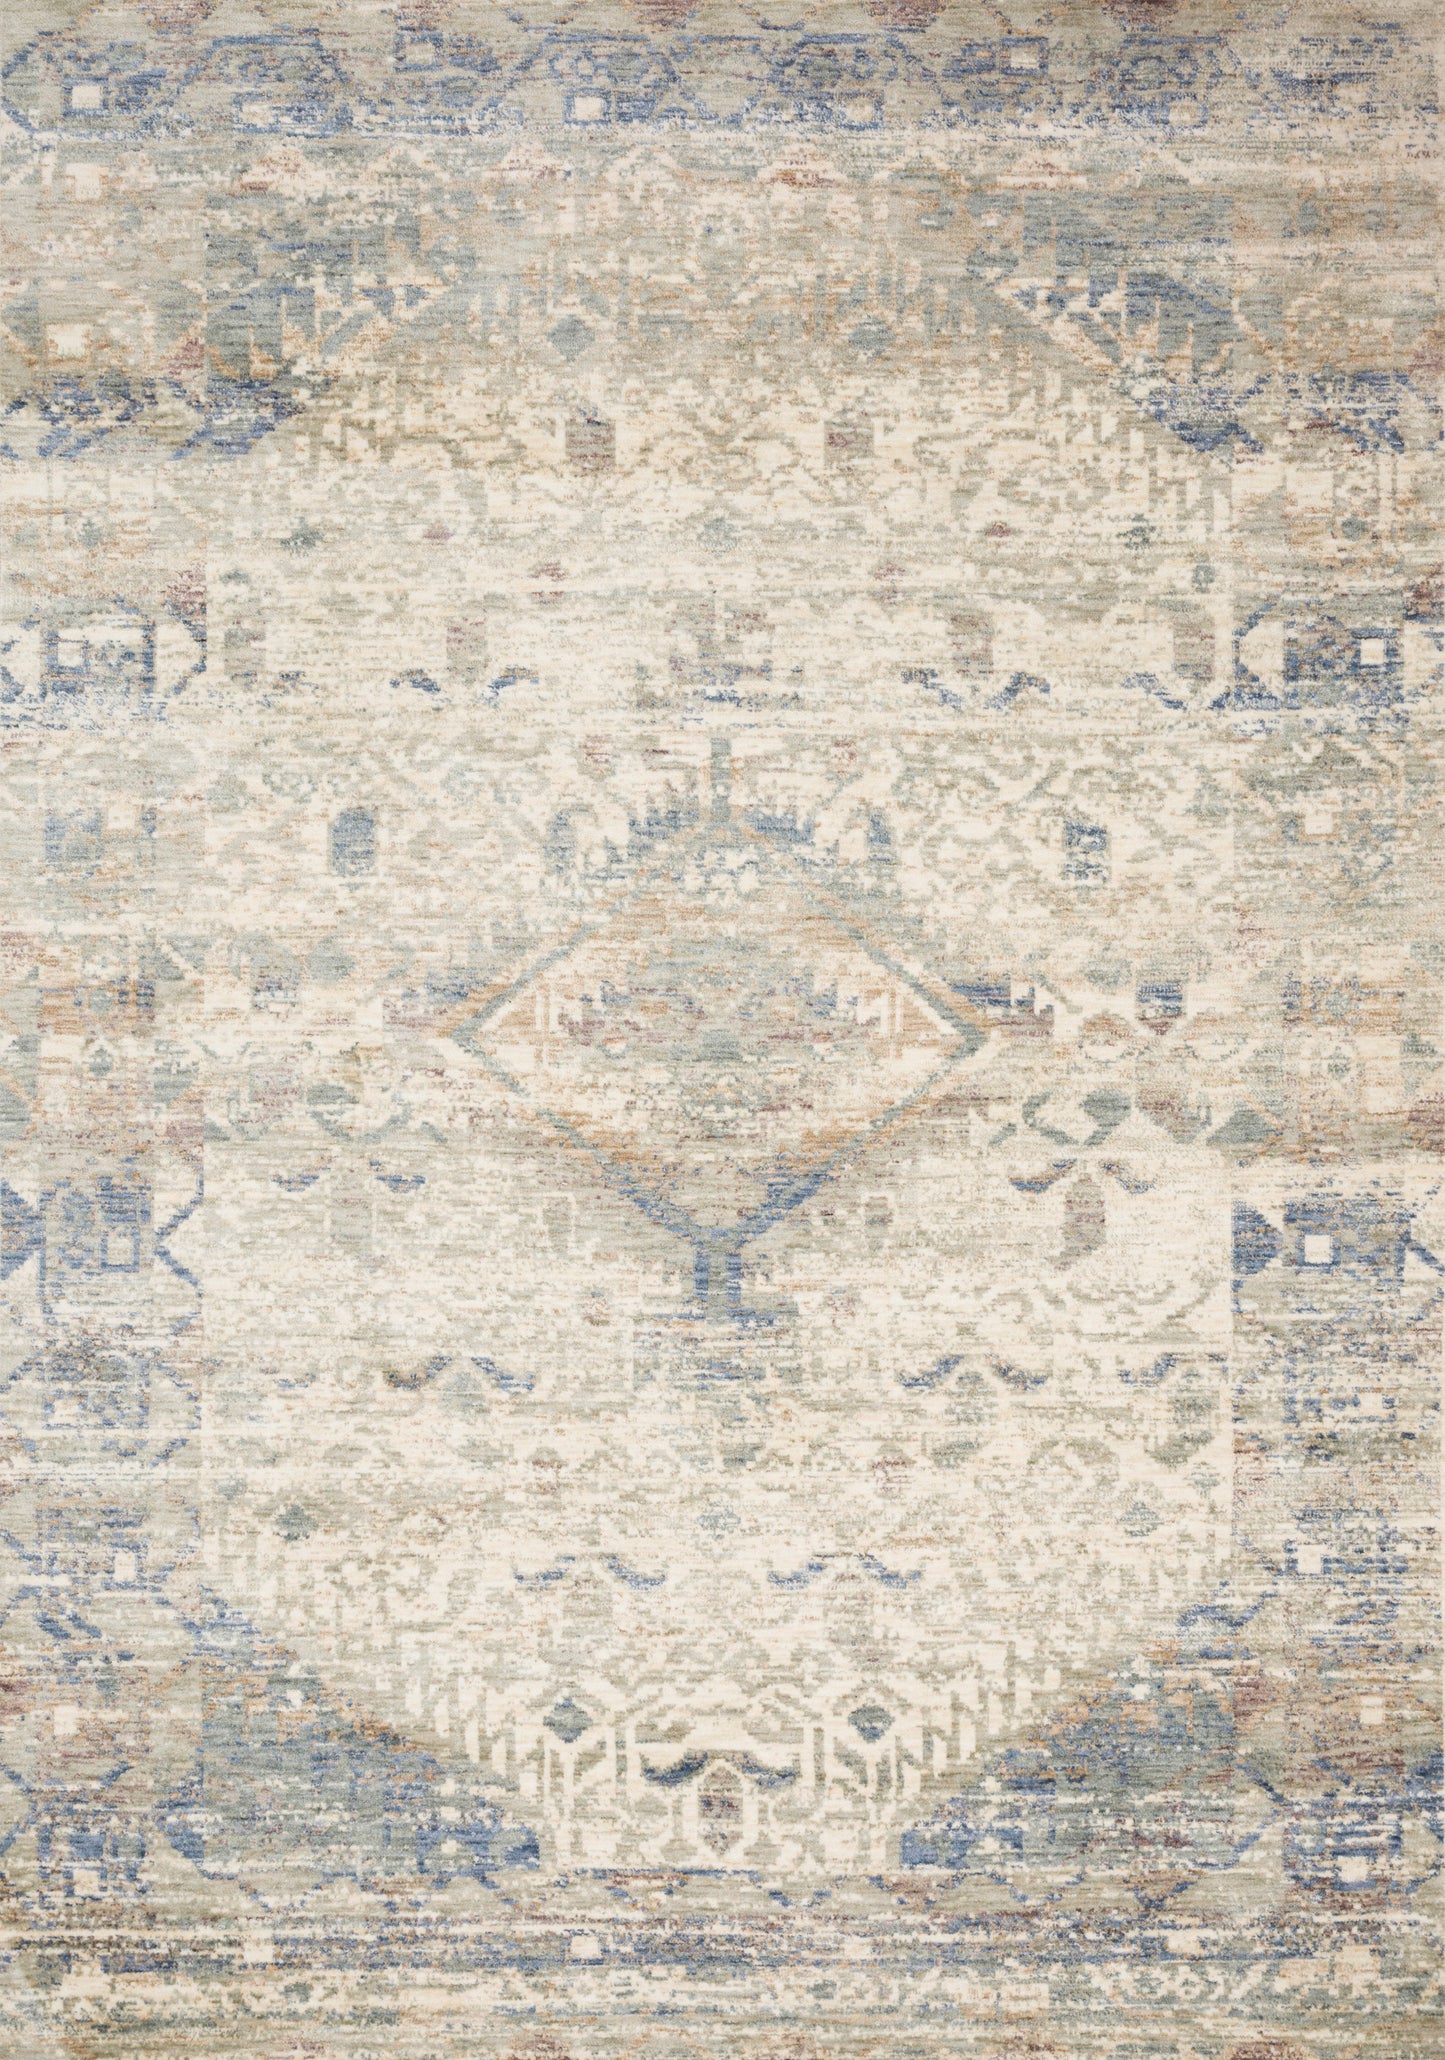 A picture of Loloi's Revere rug, in style REV-06, color Ivory / Blue